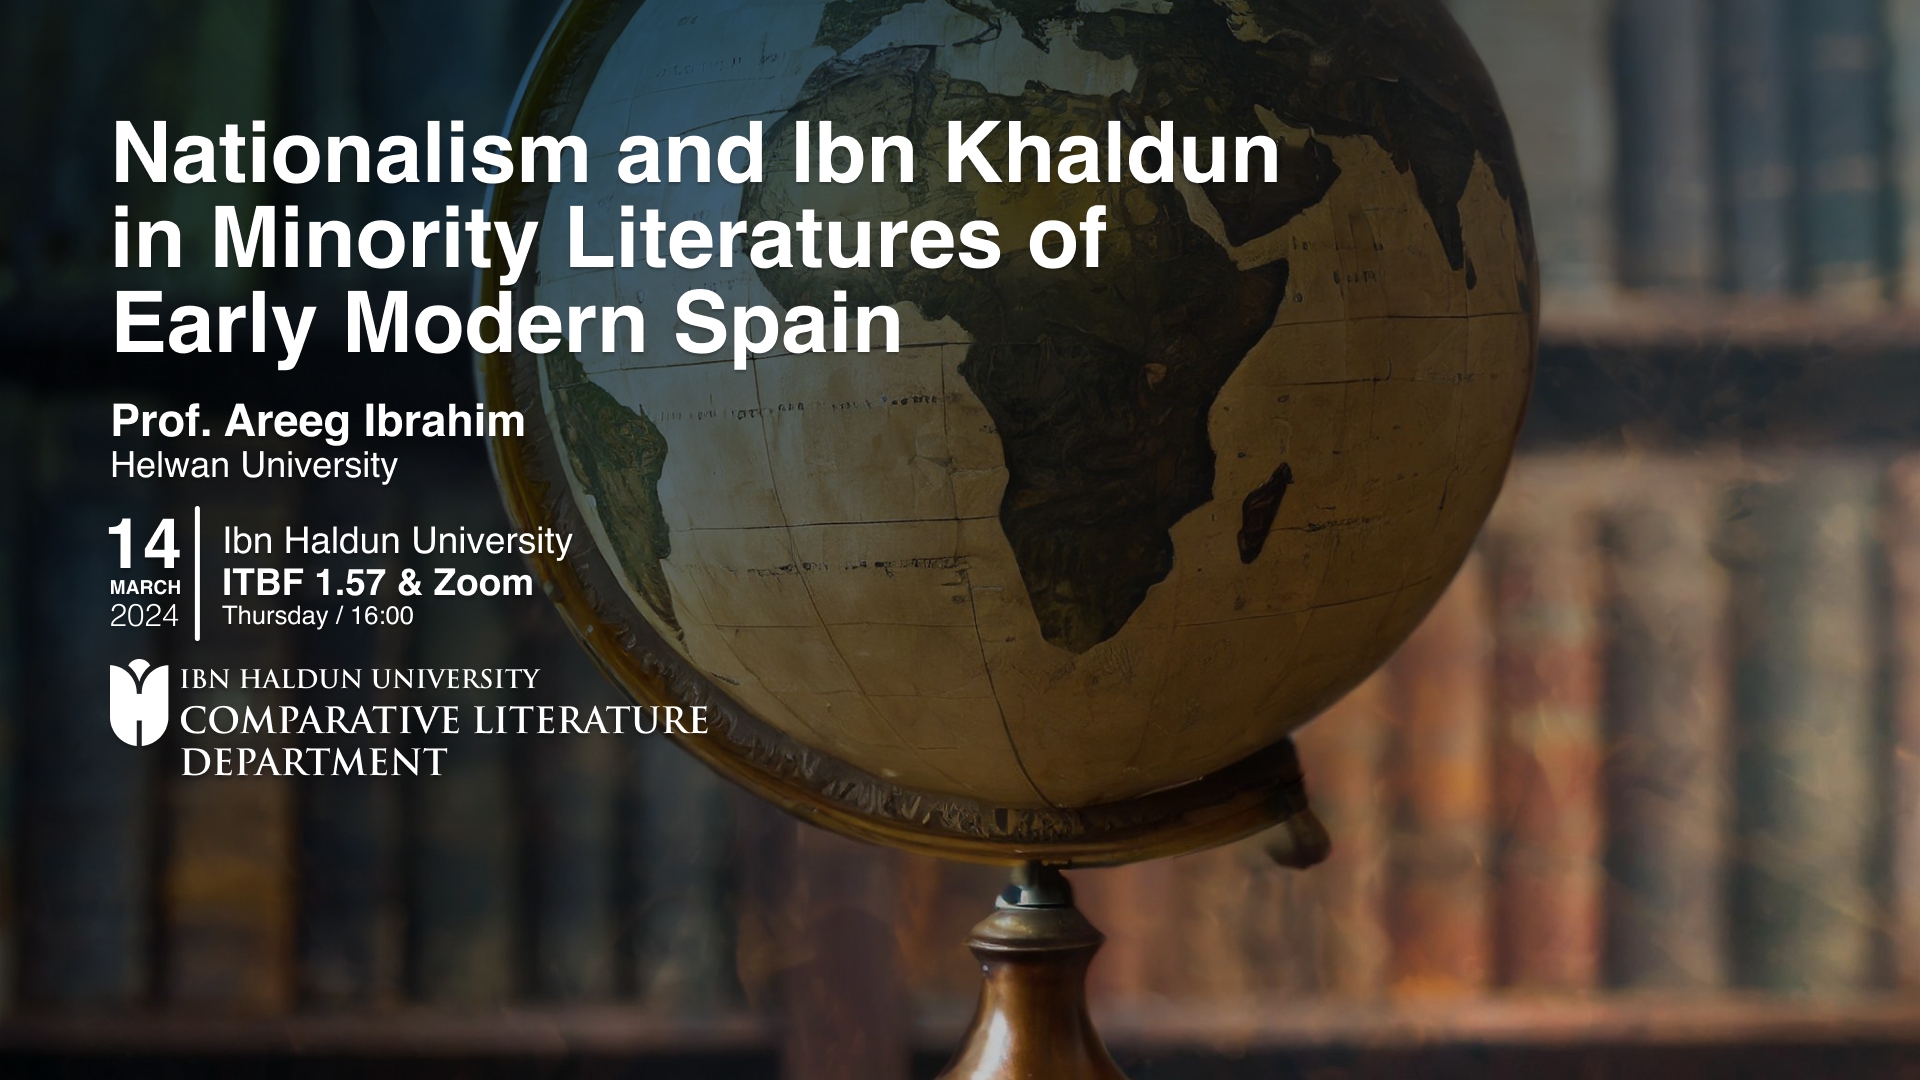 Nationalism and Ibn Khaldun in the Minority Literatures of Early Modern Spain